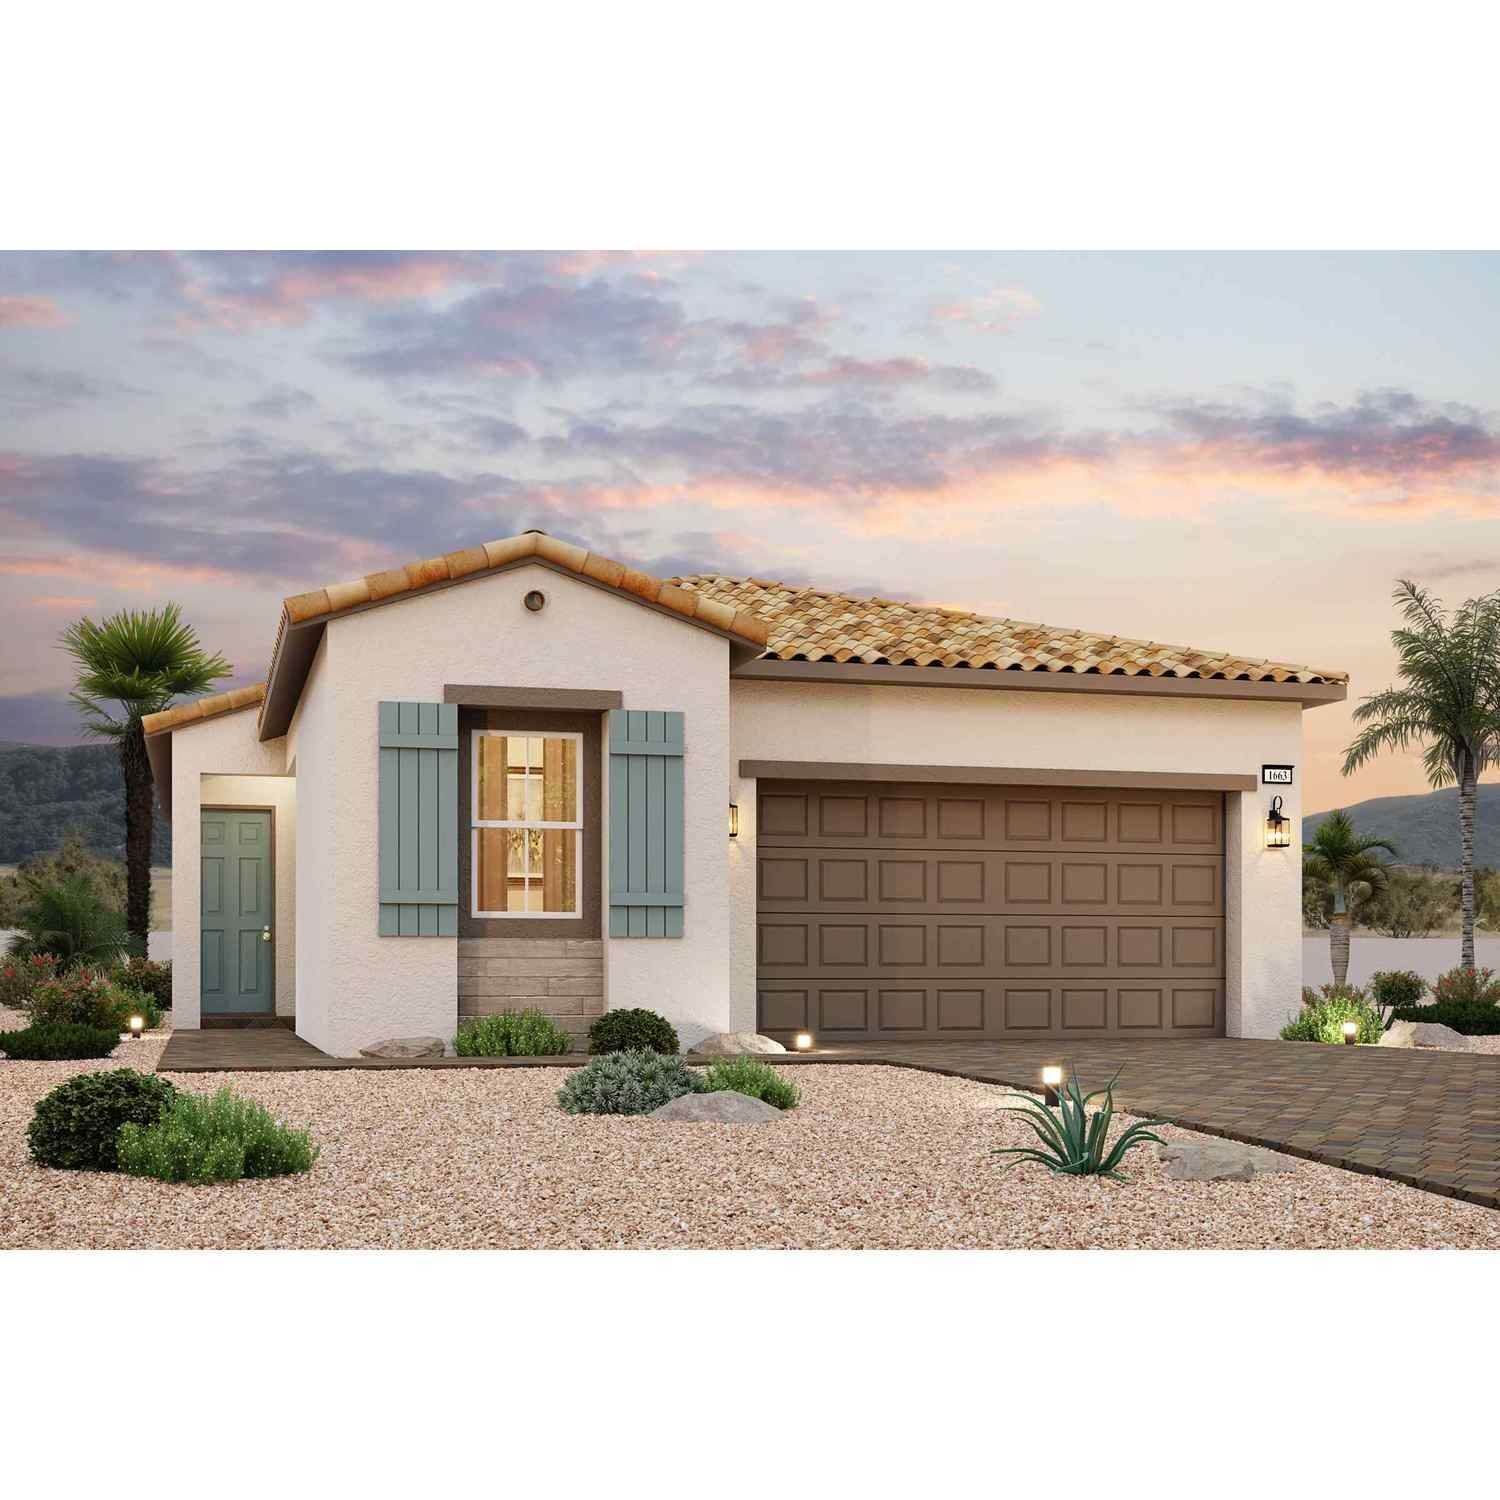 Single Family for Sale at Henderson, NV 89011